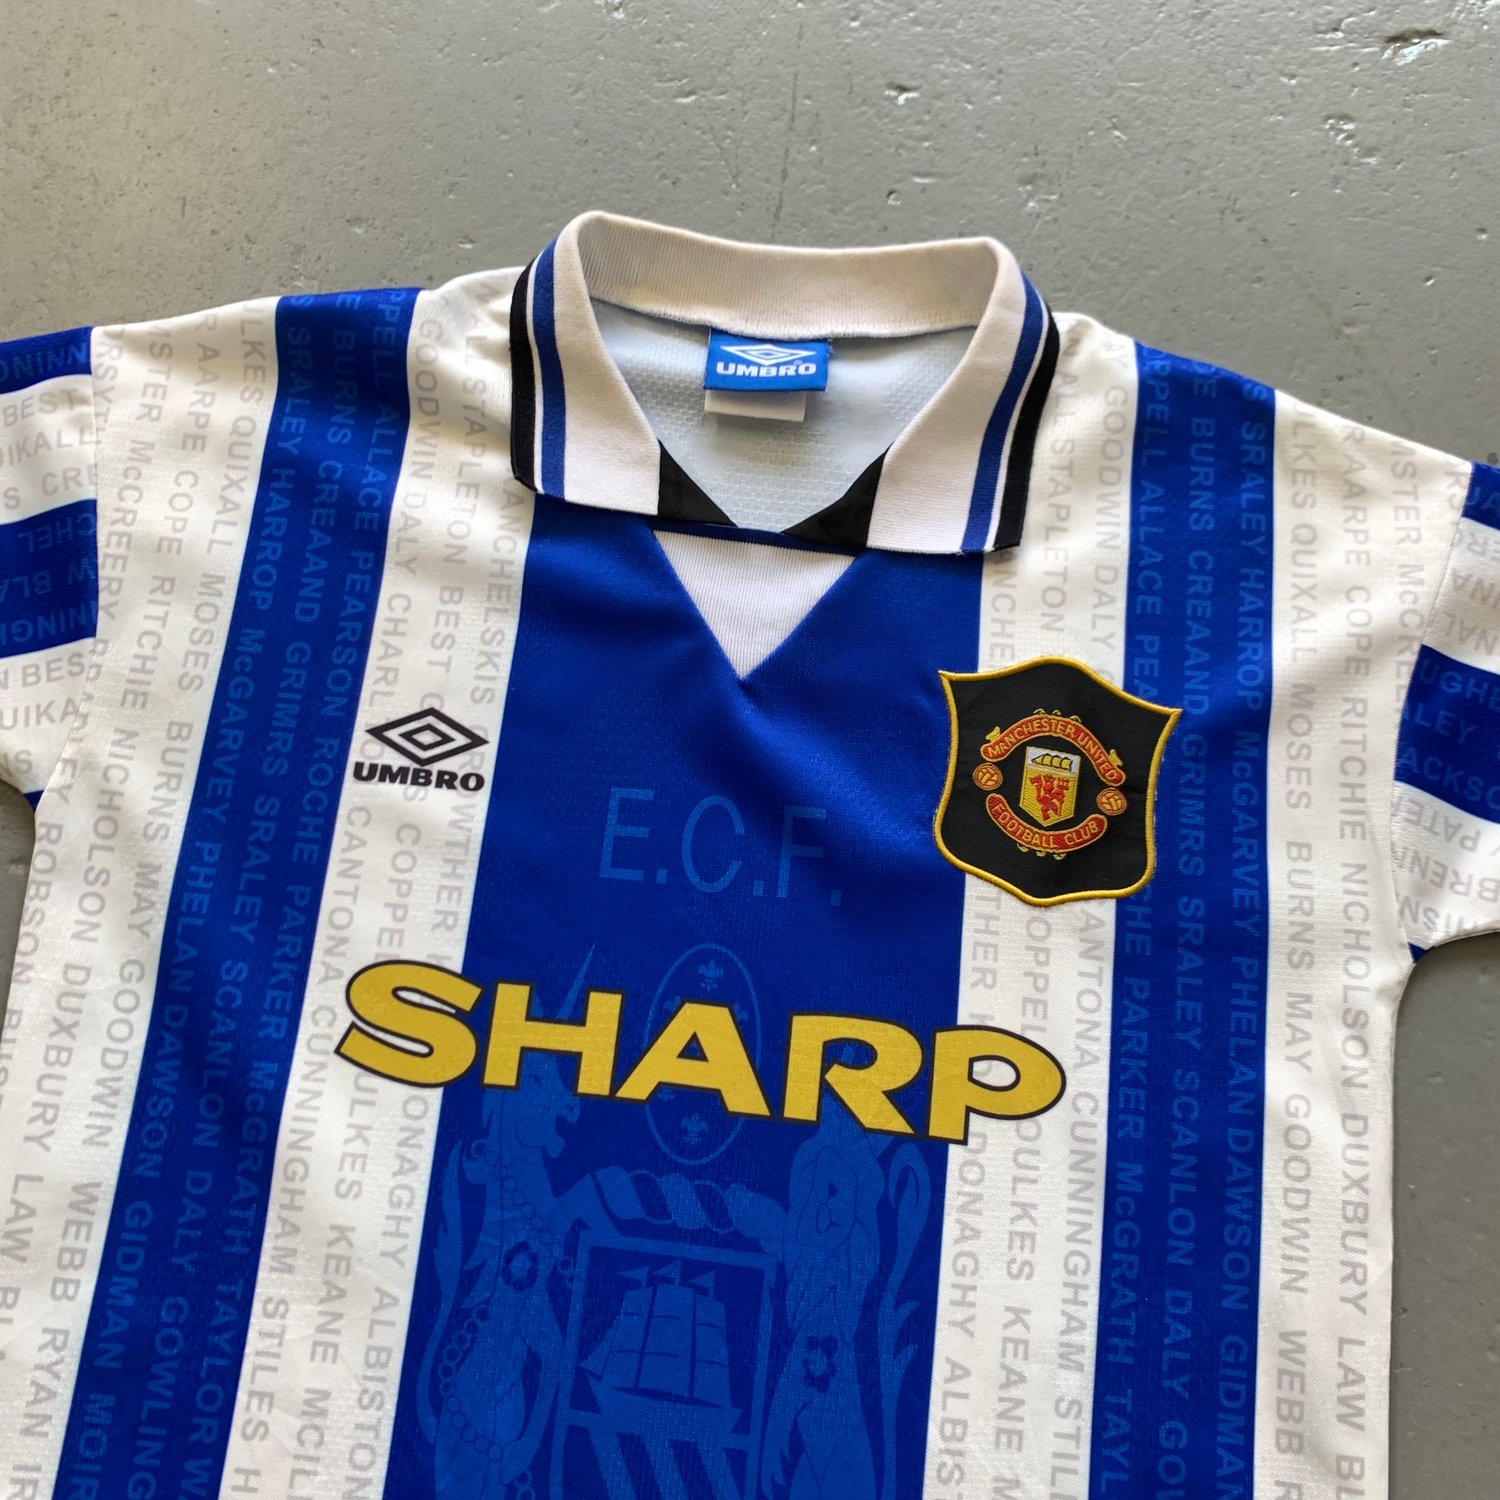 Image of 94/96 Manchester United third shirt size small 